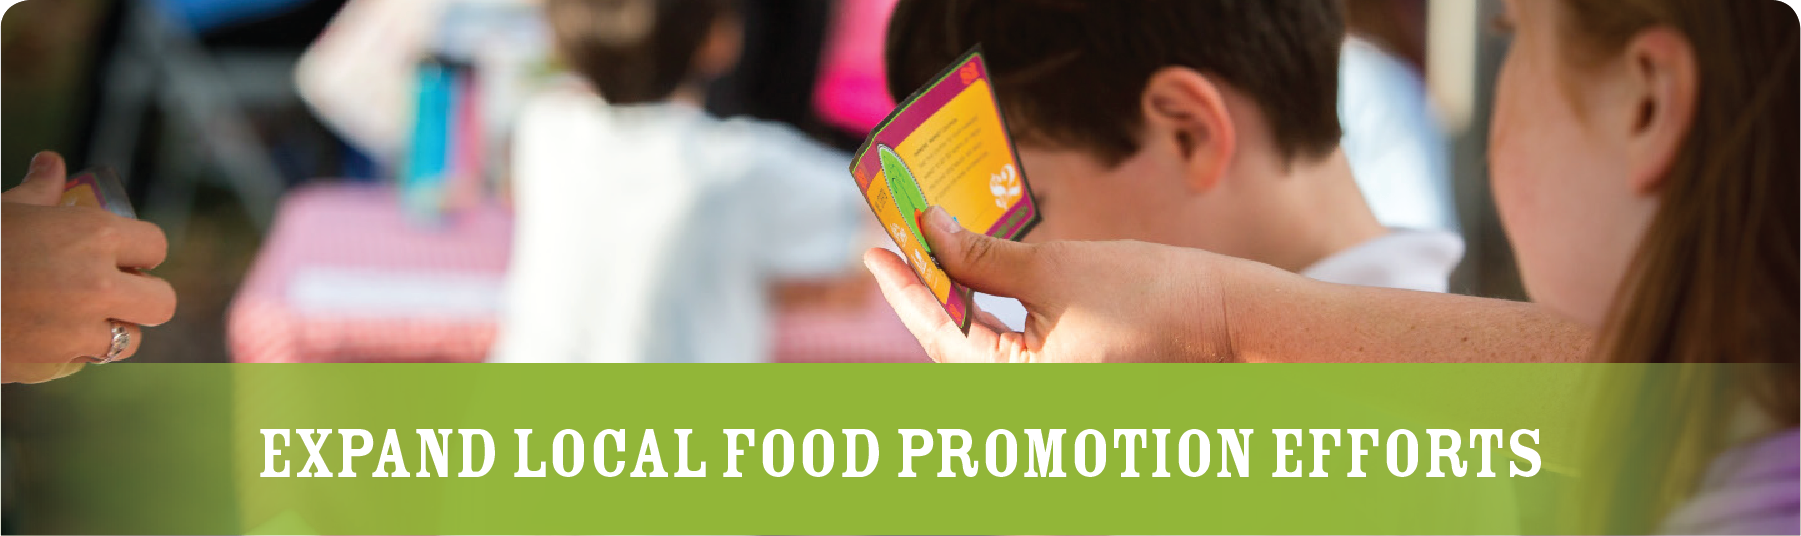 Expand Local Food Promotion Efforts